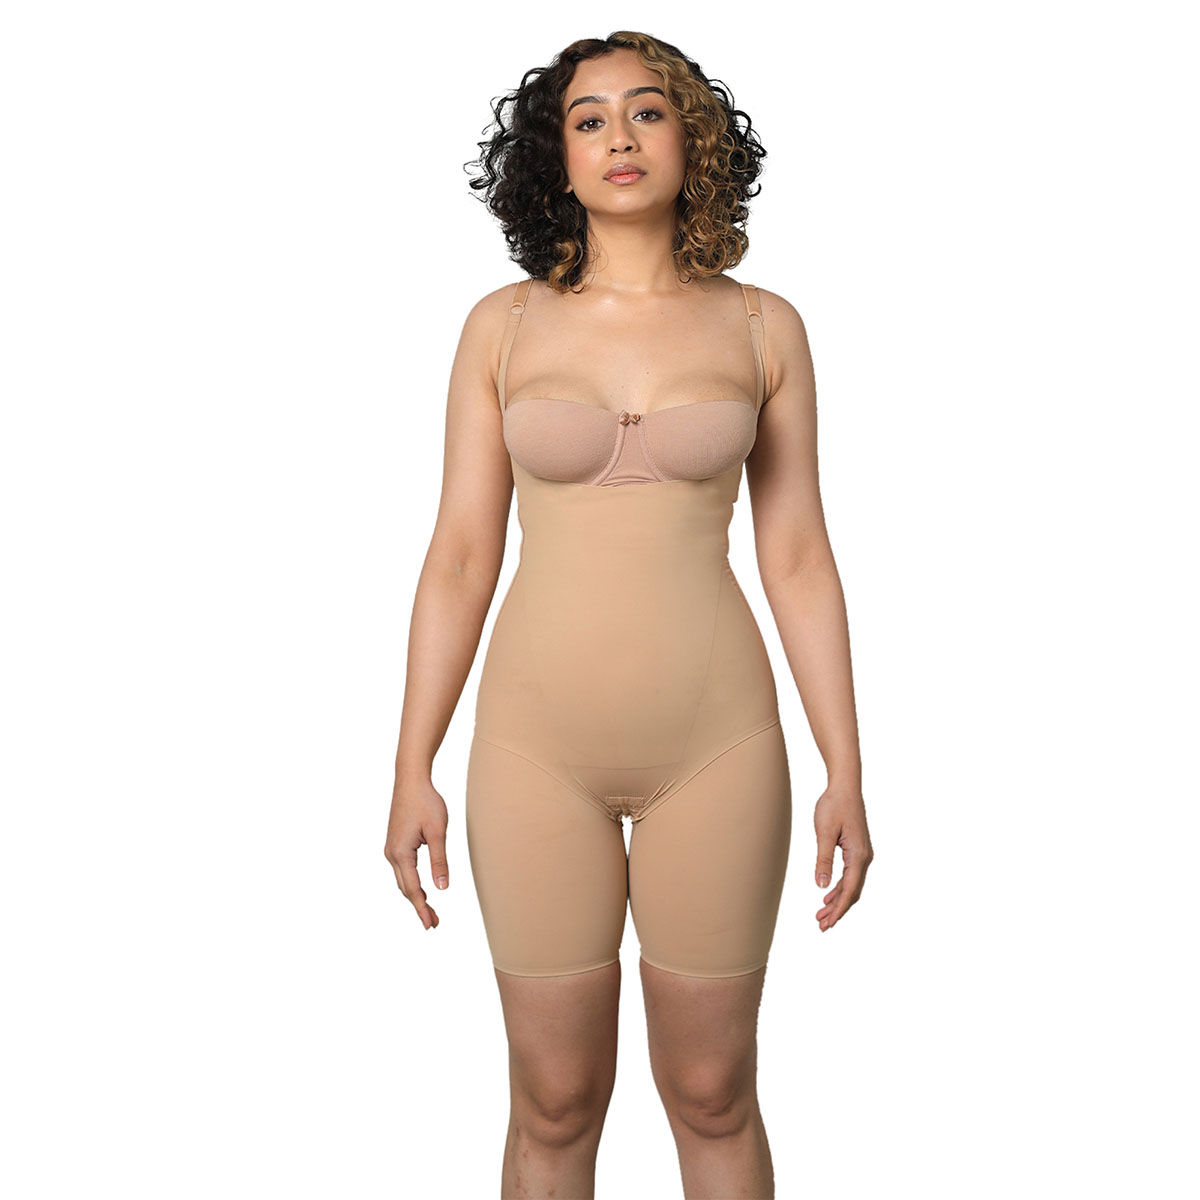 BUTTCHIQUE Full-Bodysuit All Over Body Sculpting (Beige Colour) Shapewear  for Effective Tucking & Natural Contour With Adjustable Straps